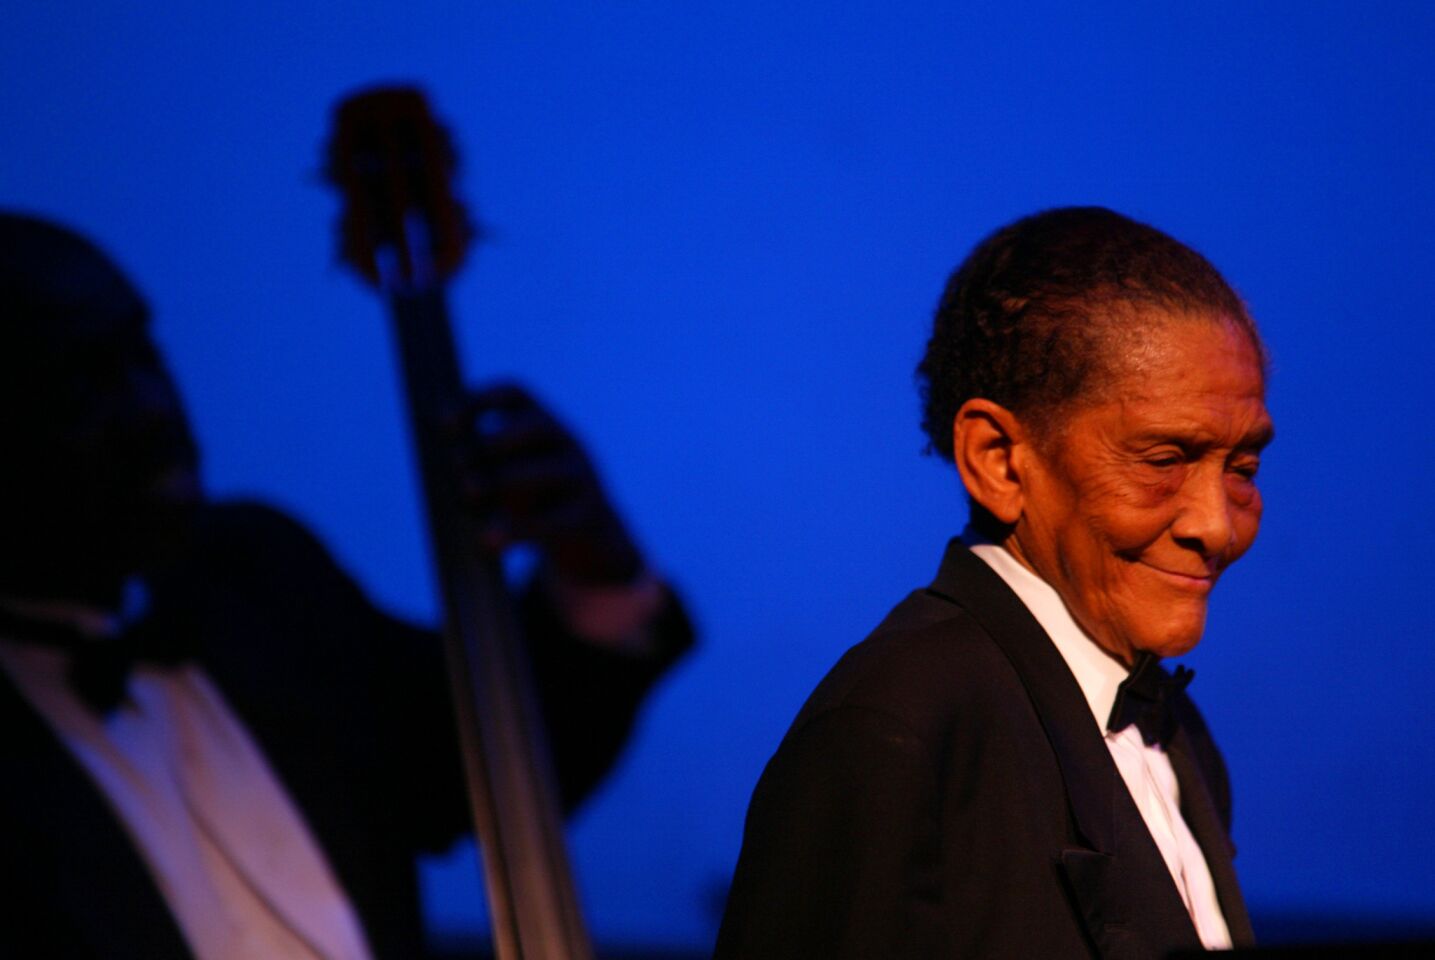 Often called "Little Jimmy Scott" for his small stature and memorable, high-pitched voice, Scott was one of the jazz world's most unique sounds. His voice earned praise from the likes of Ray Charles, Madonna and Lou Reed. He was 88.